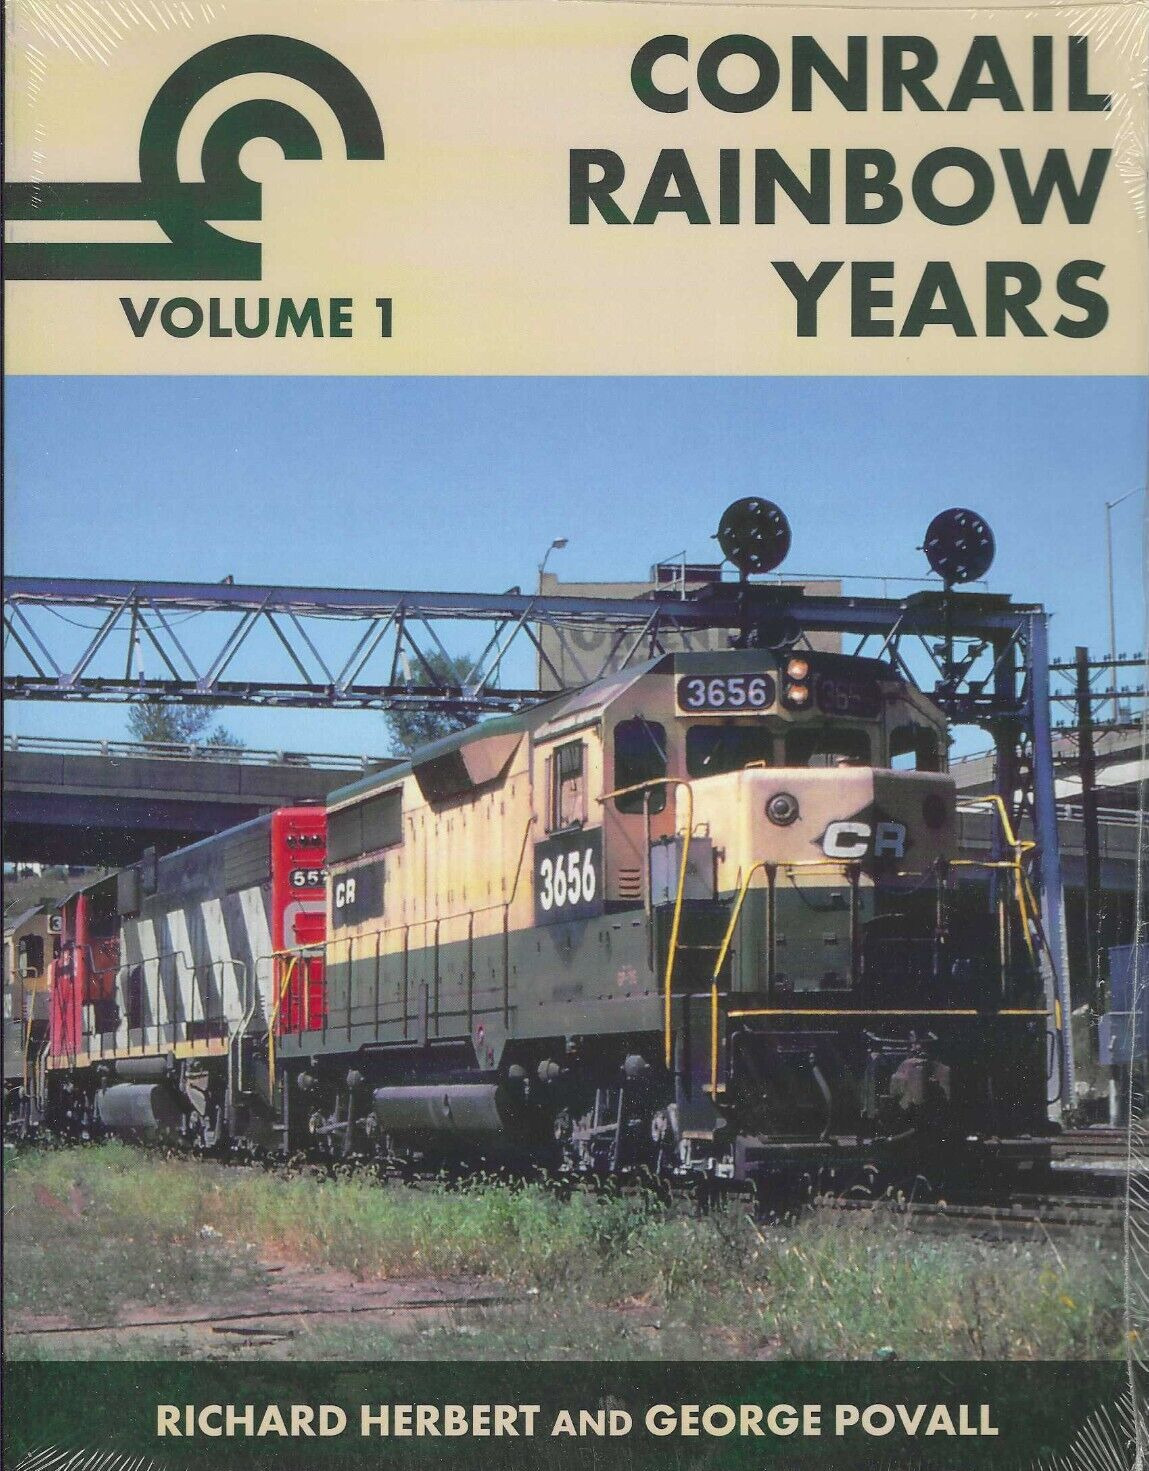 CONRAIL RAINBOW YEARS, Vol. 1: The First Four Years, 1976-1979 (LAST BRAND NEW)